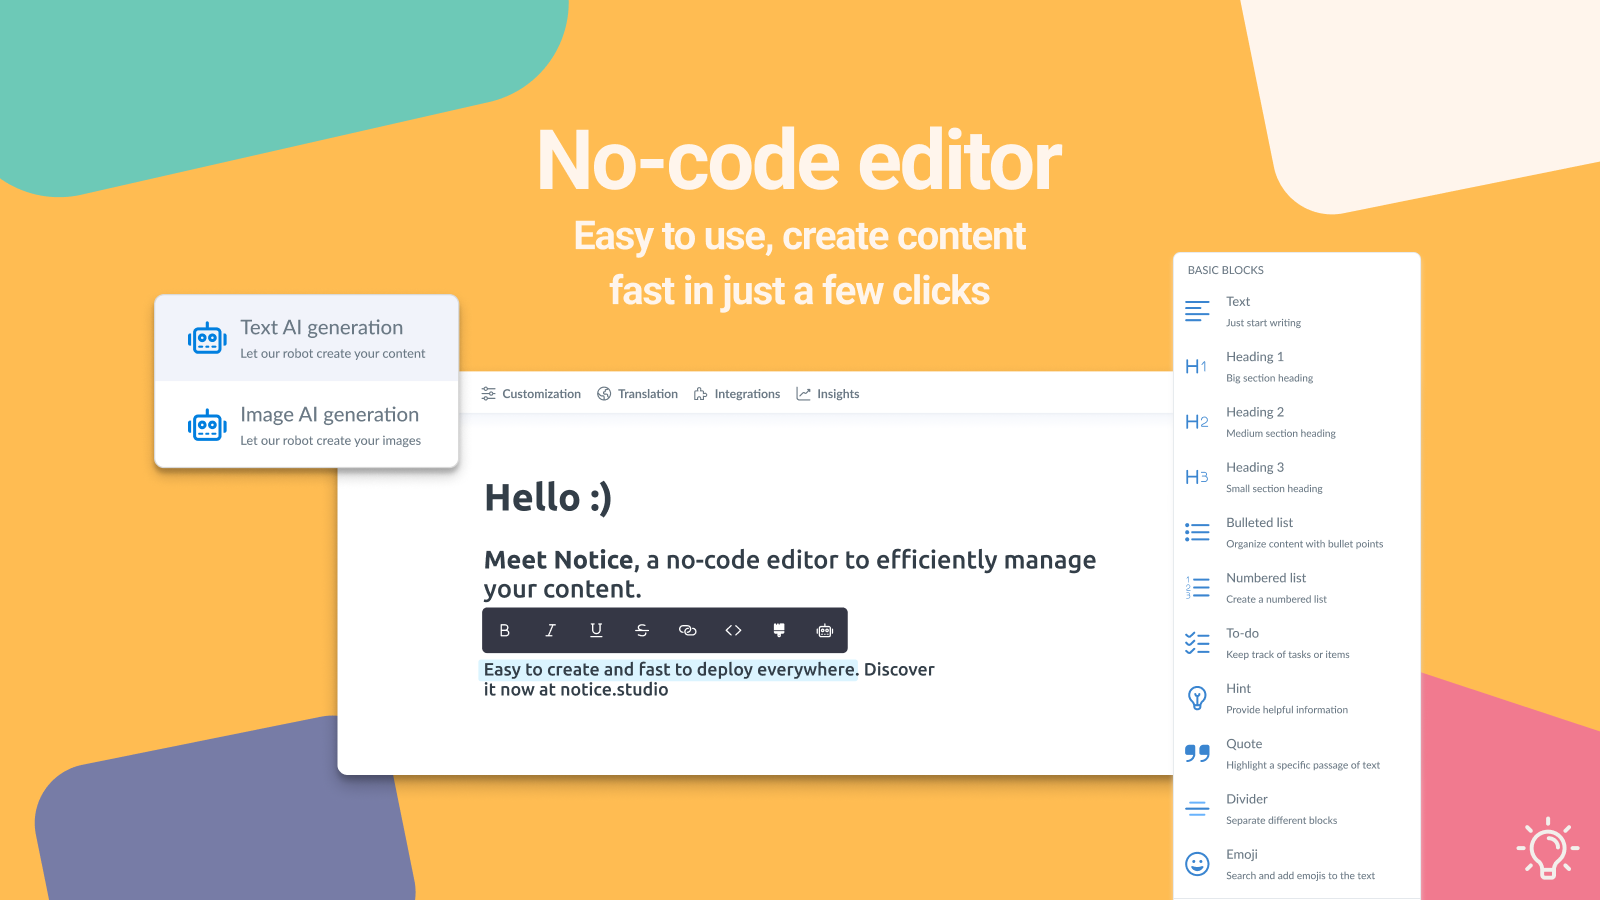 No-code editor to create, translate and deliver content fast